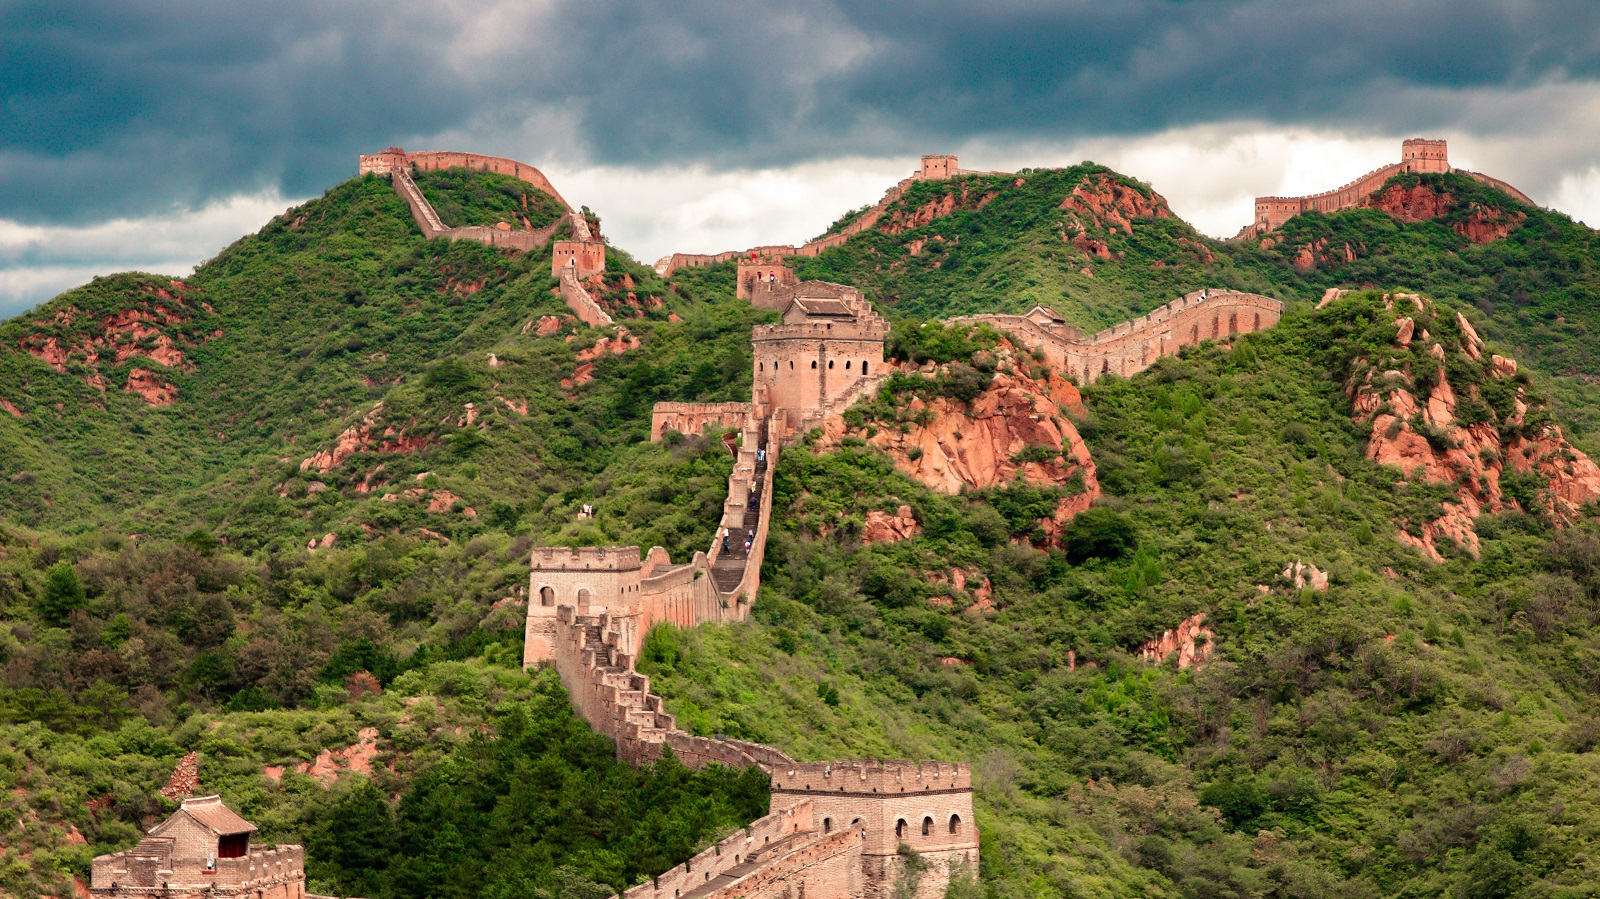 You can now walk the Great Wall of China with Google - Memeburn image